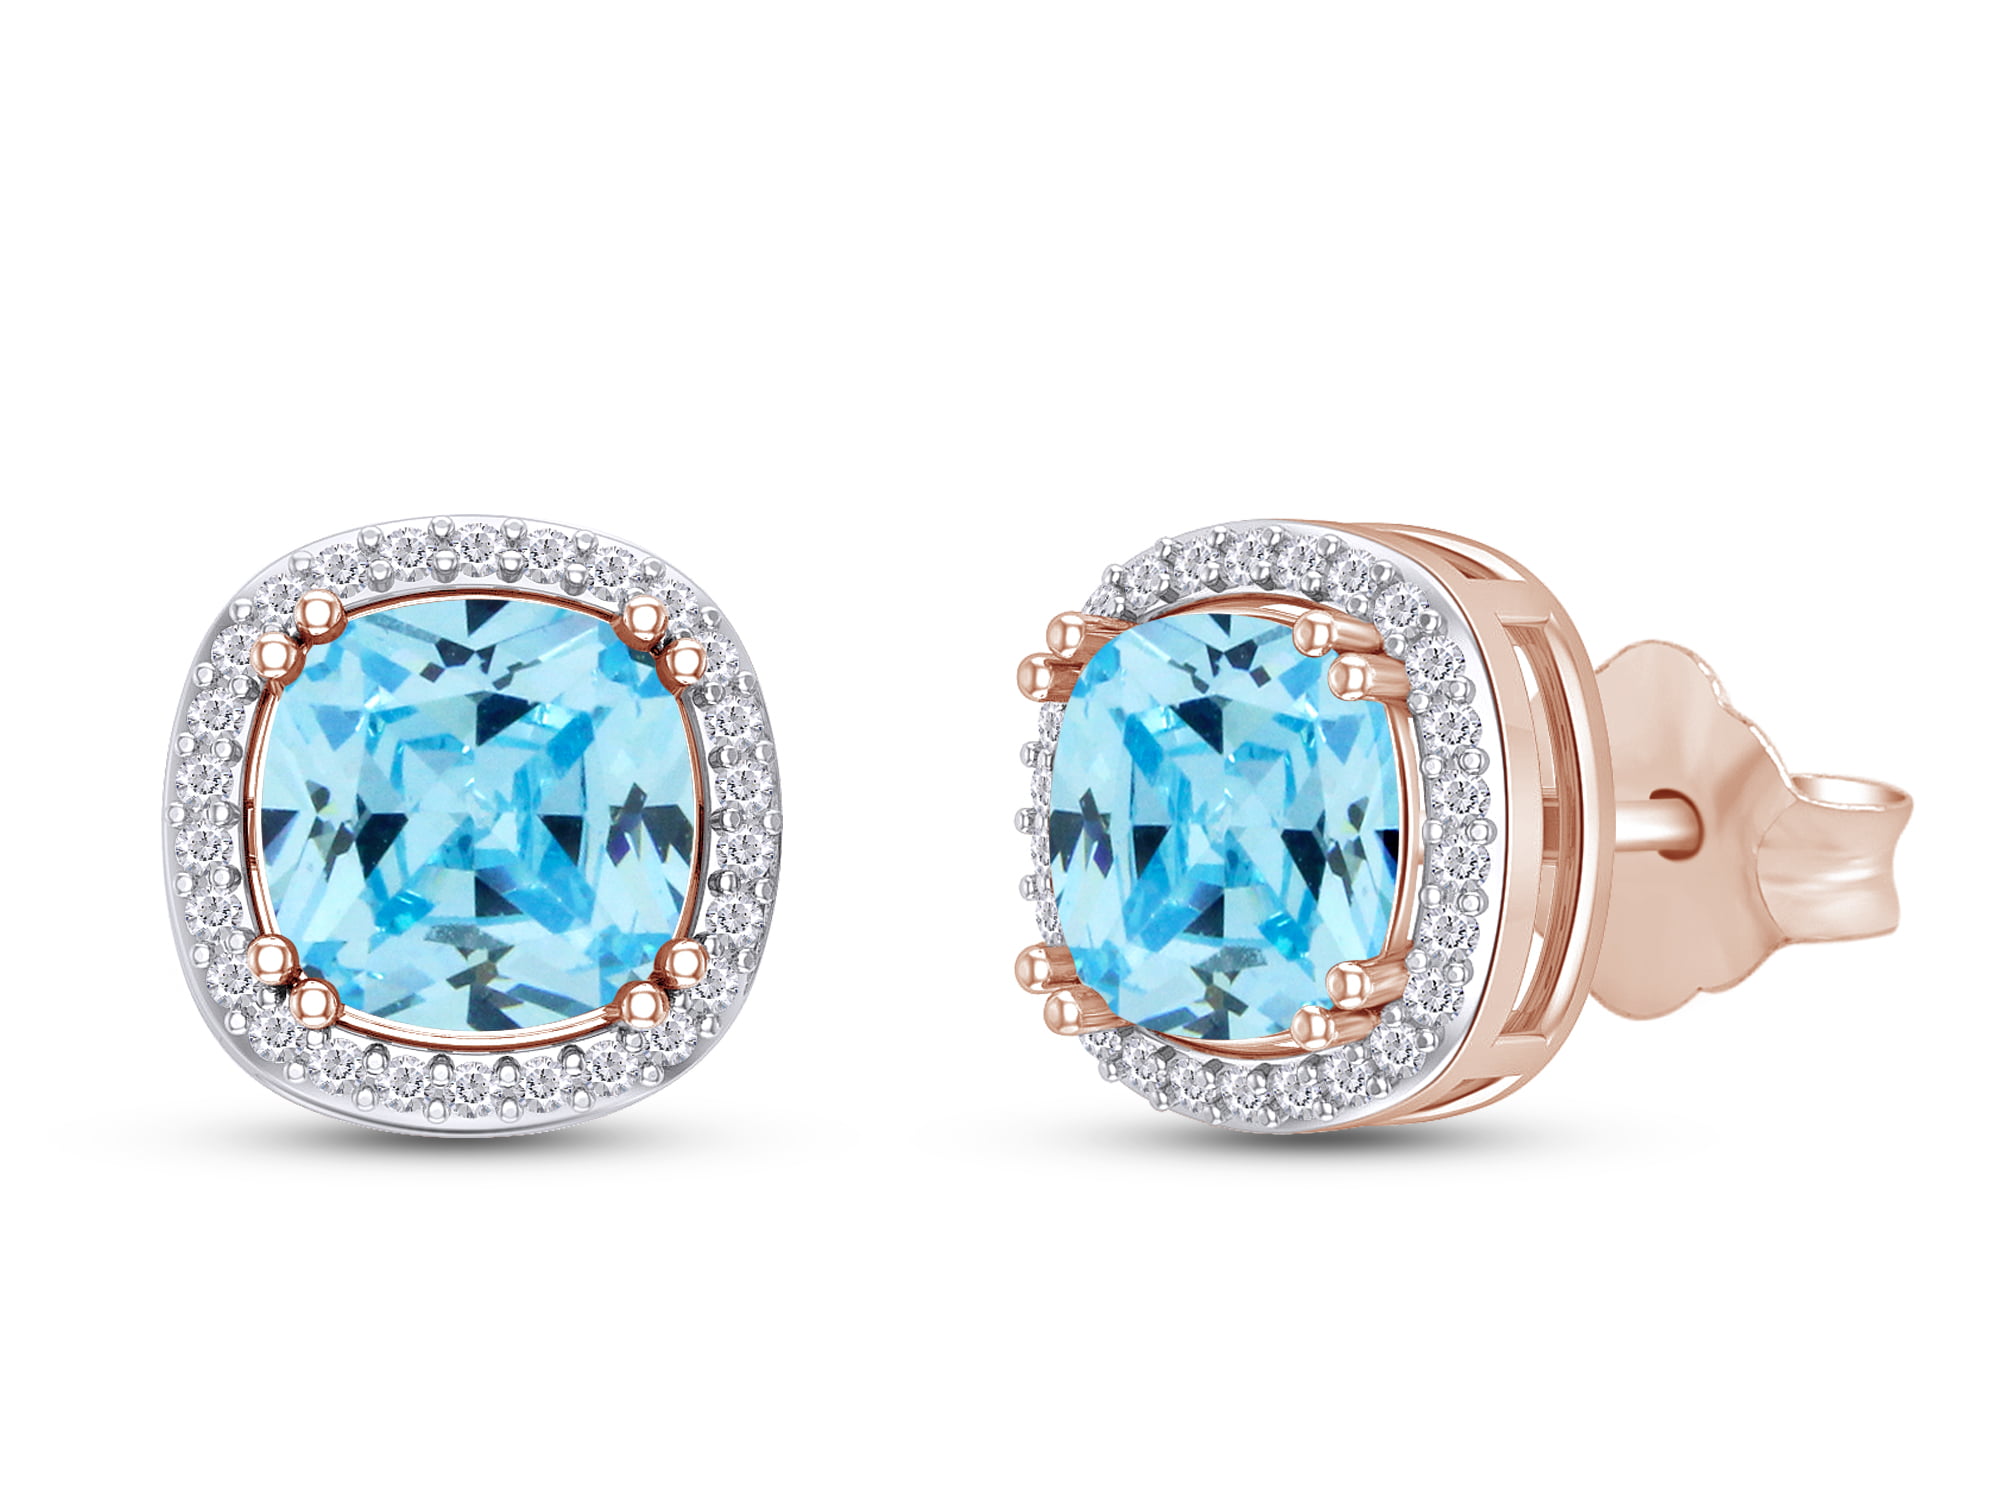 4 cttw Valentine's Day Gifts Round Cut Simulated Aquamarine Stud Earrings in 10K Solid Gold